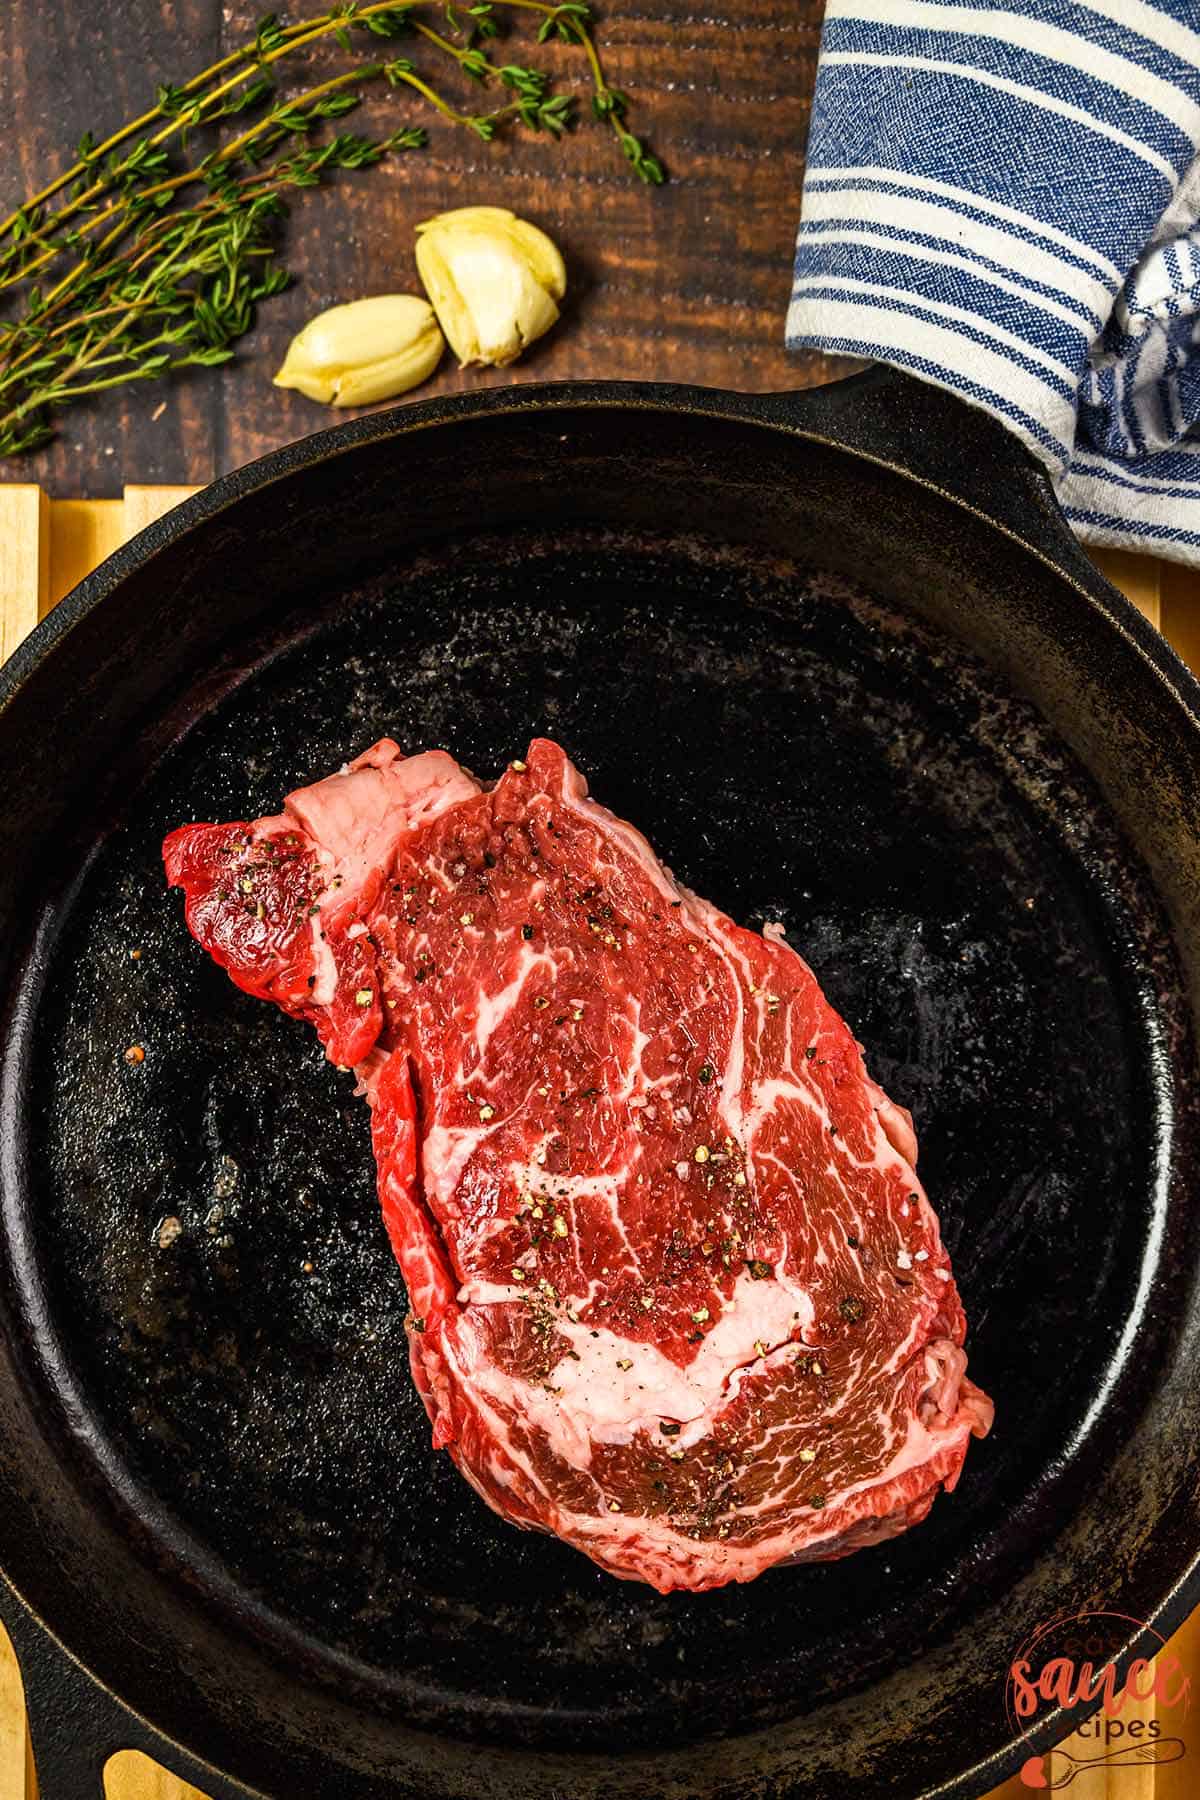 a steak added to a pan to sear